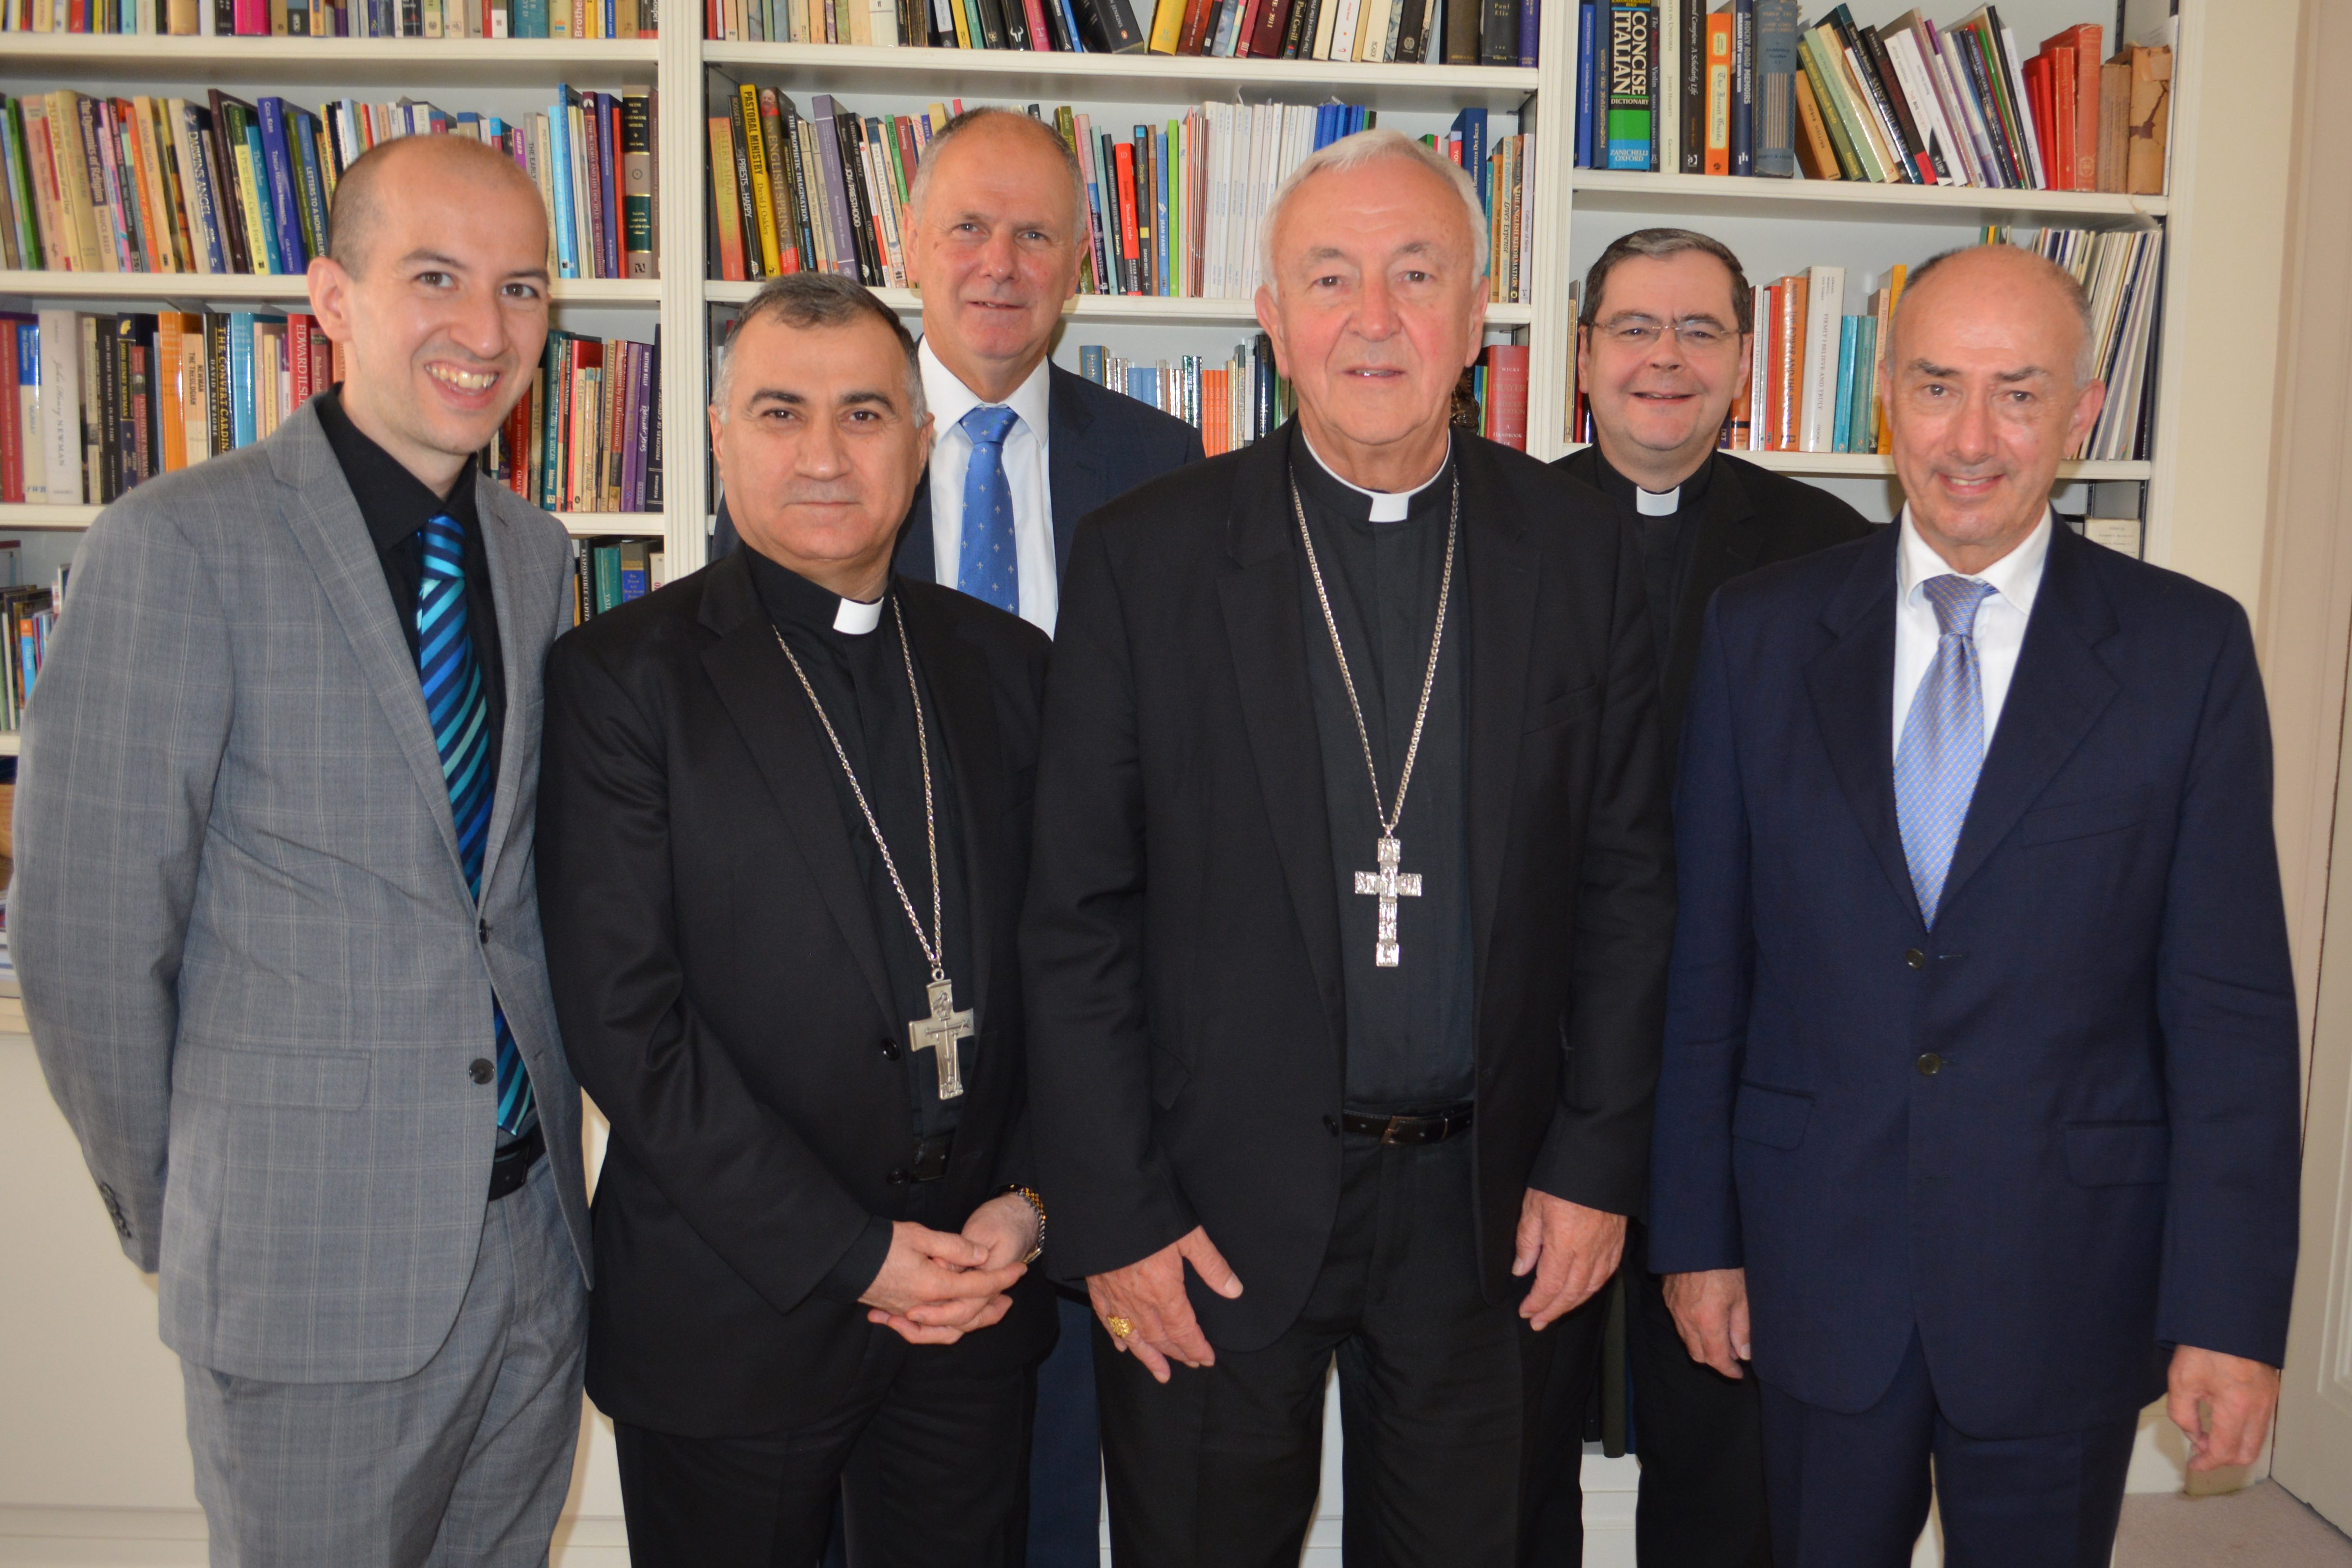 Picture shows (left to right): Liam Allmark, Head of Public Affairs, Catholic Bishops’ Conference of England & Wales; Chaldean Catholic Archbishop Bashar Warda of Erbil, Iraq; Neville Kyrke-Smith, National Director, Aid to the Church in Need (UK); Cardinal Vincent Nichols, Archbishop of Westminster; Father Dominic Robinson SJ, Ecclesiastical Assistant, Aid to the Church in Need (UK); John Neill, Assistant to Archbishop Warda